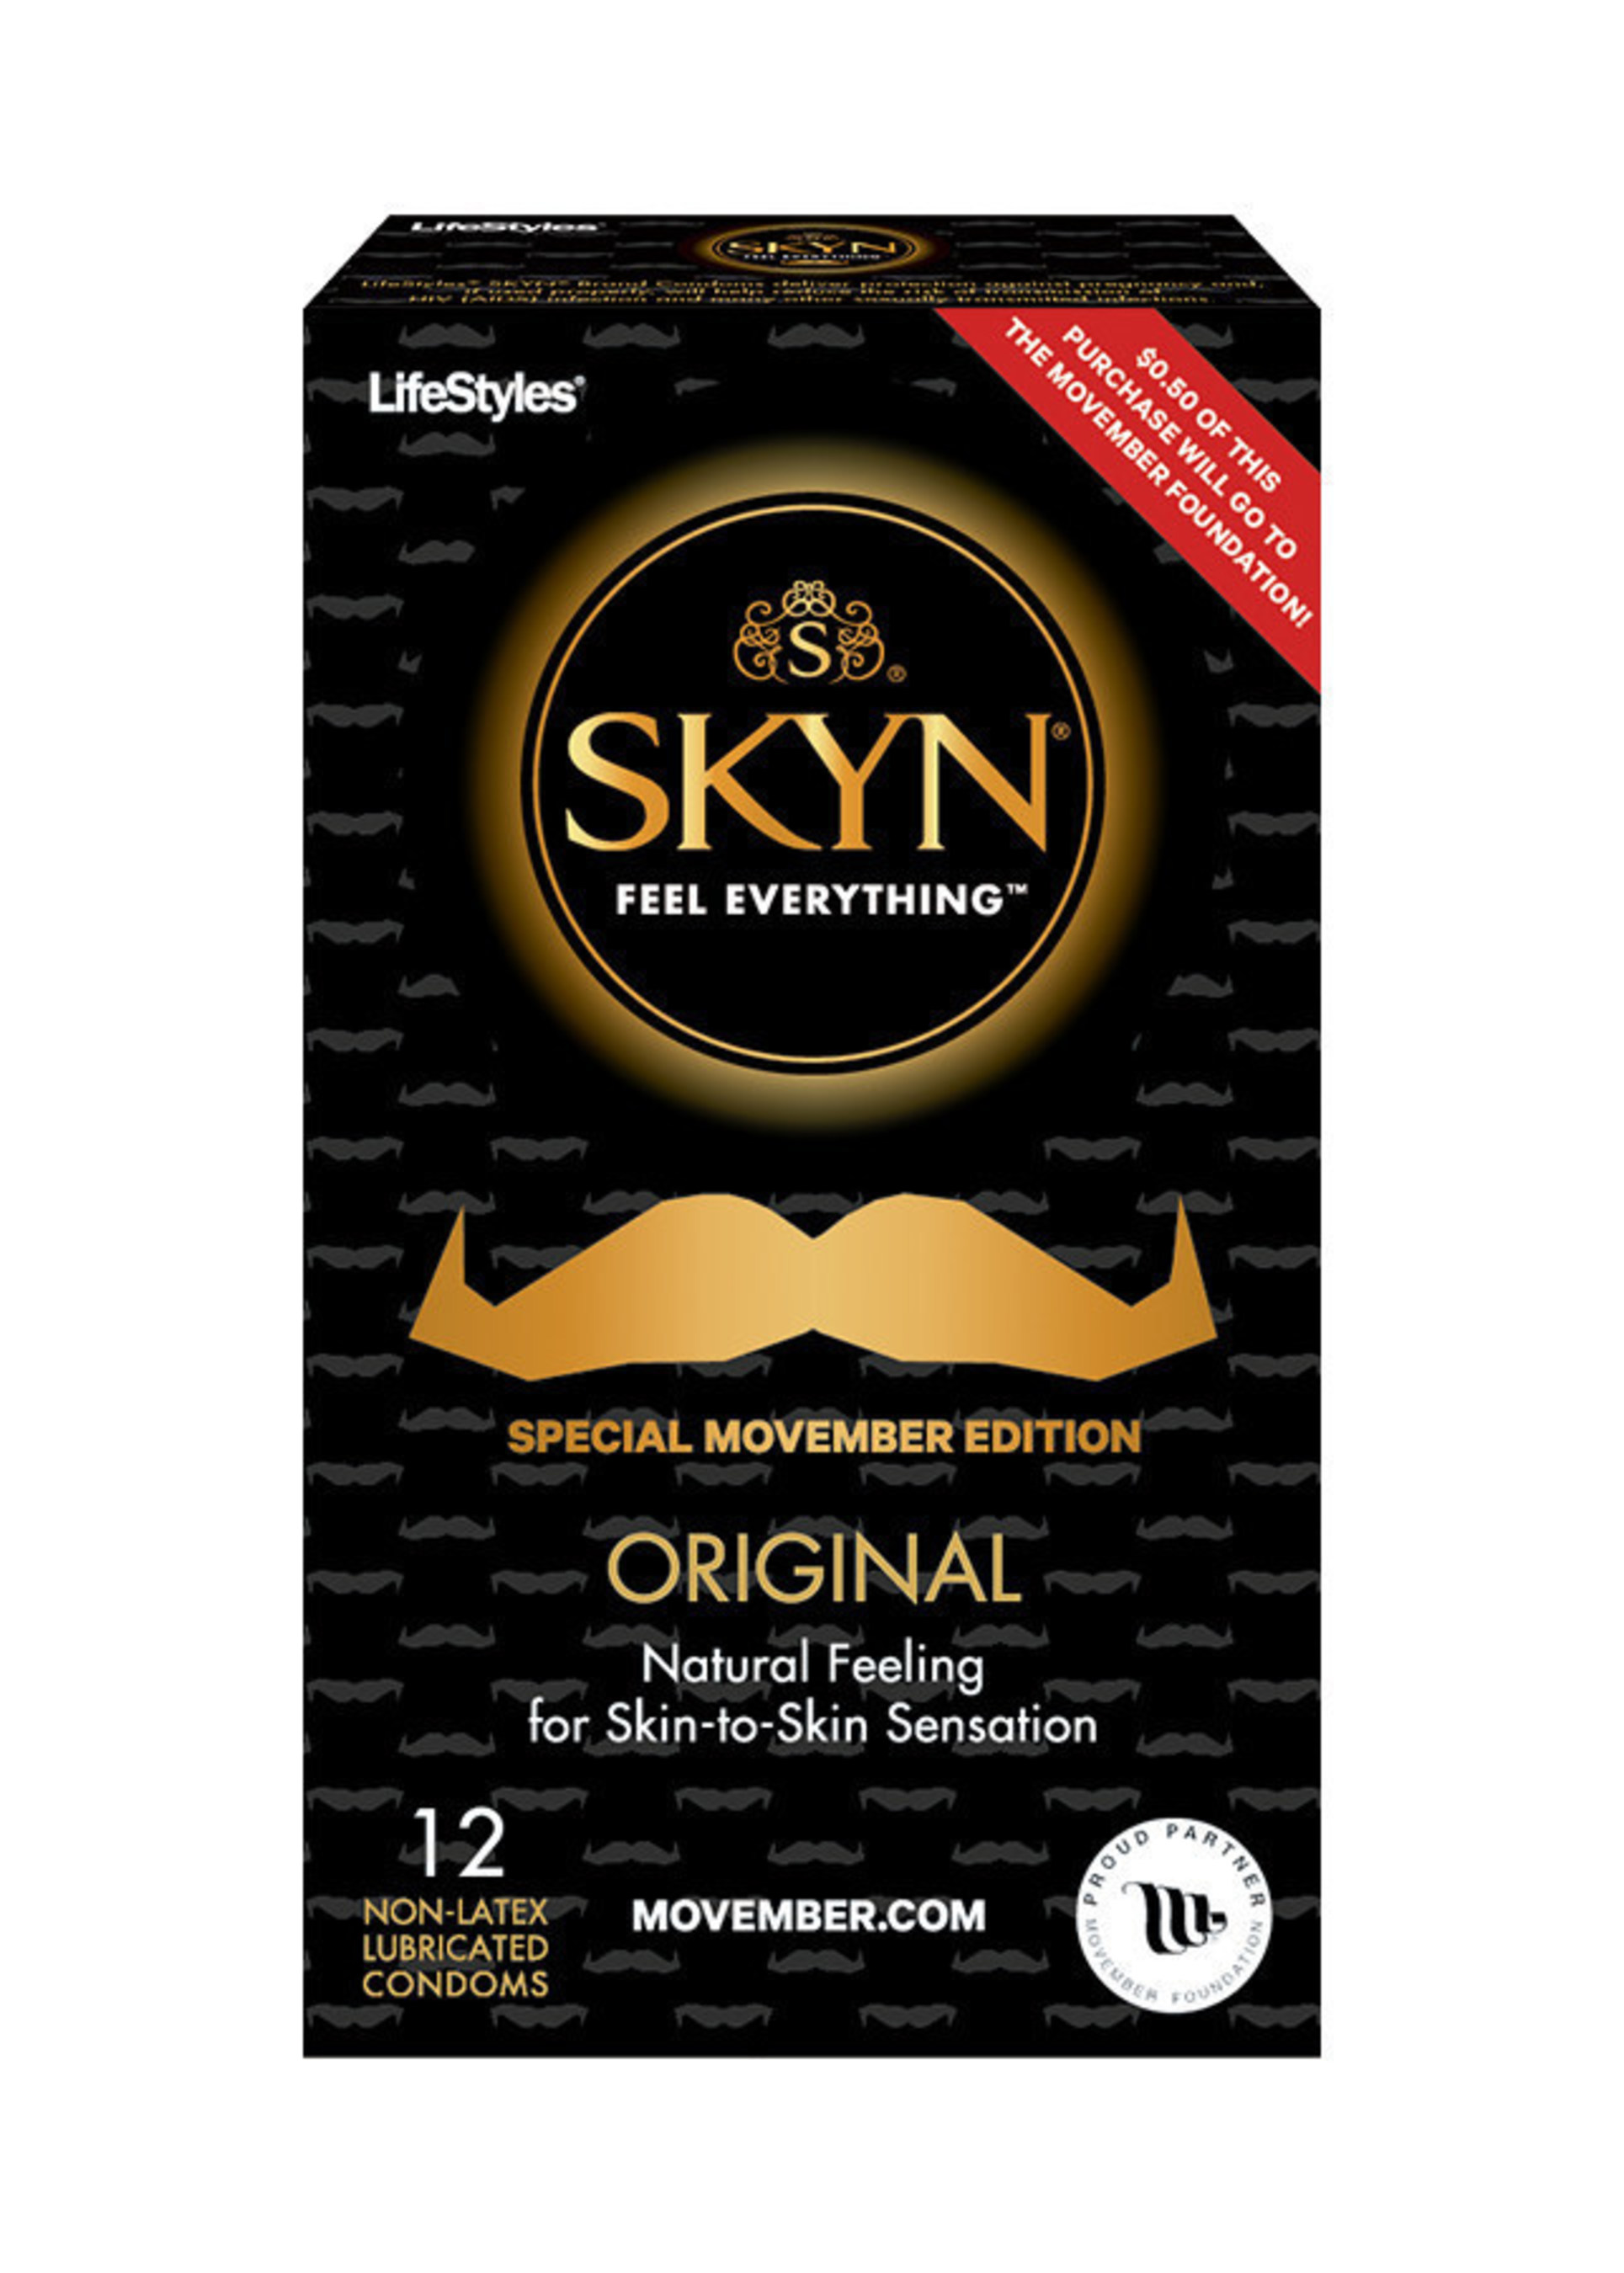 SKYN(R) Condoms by LifeStyles(R) Launches Special Movember Edition Package Design to Benefit Global Men's Health Charity